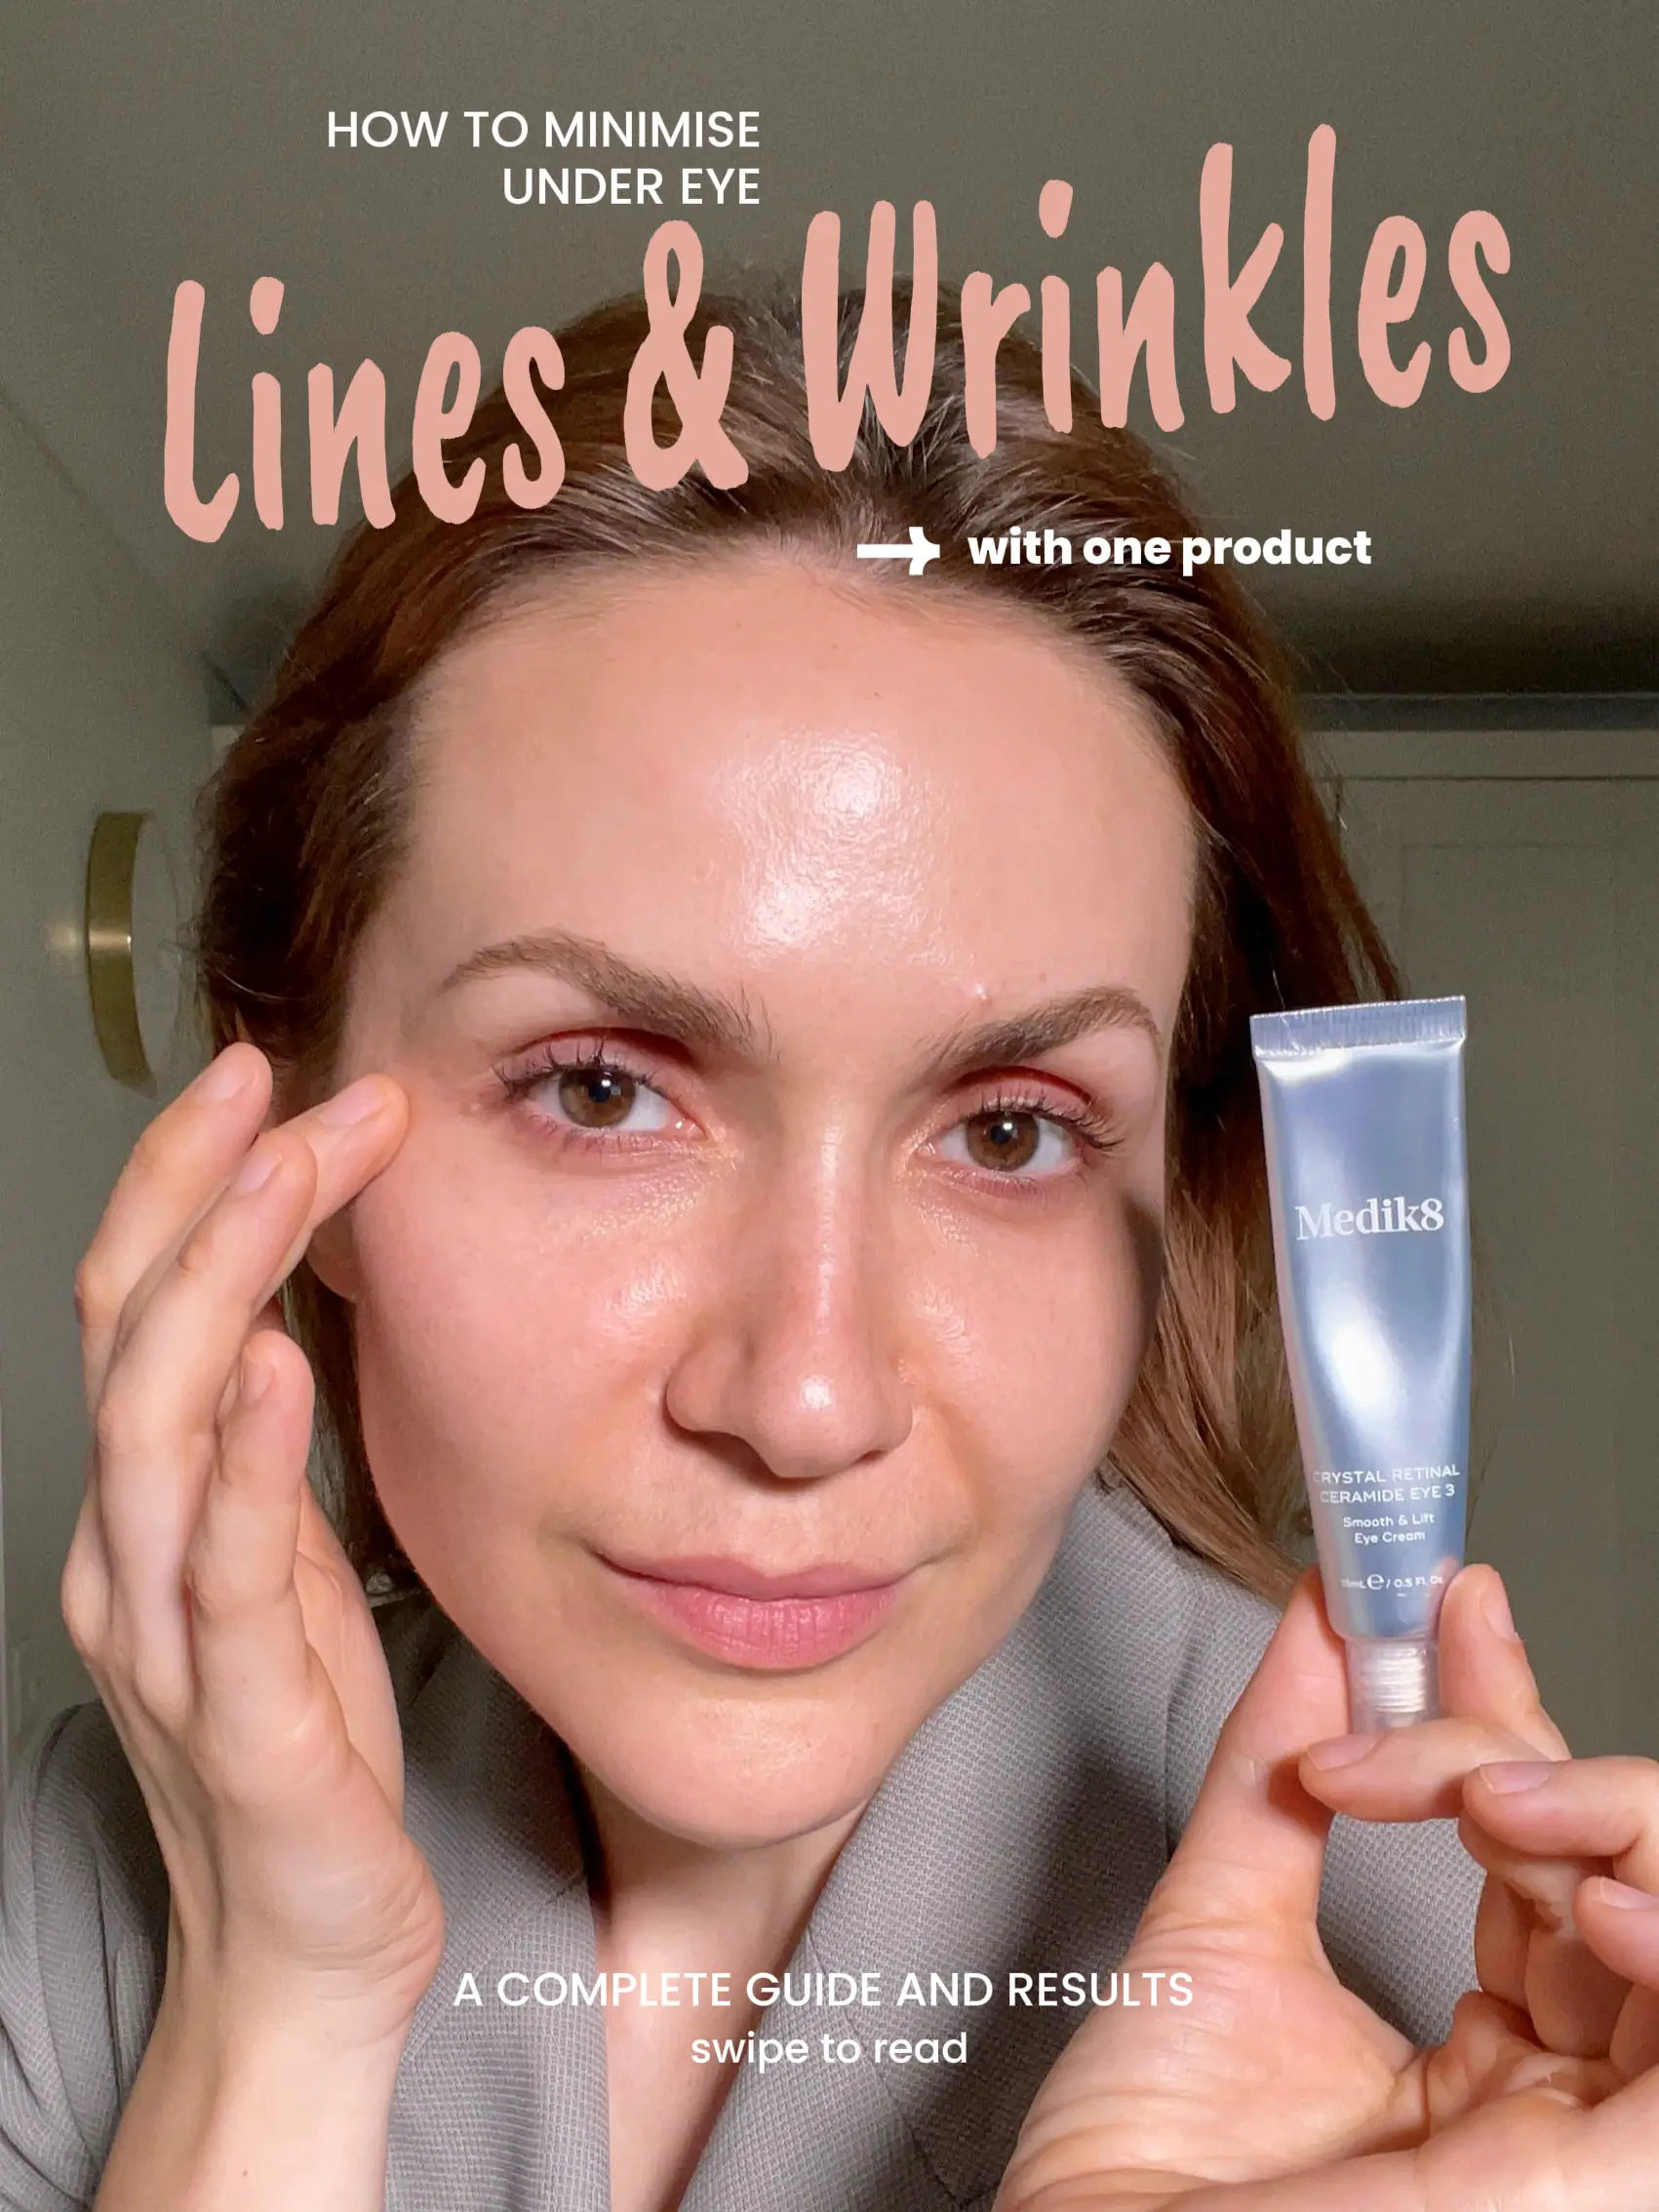 Click on the filters to try them! #faceliftmakeup #facelifting